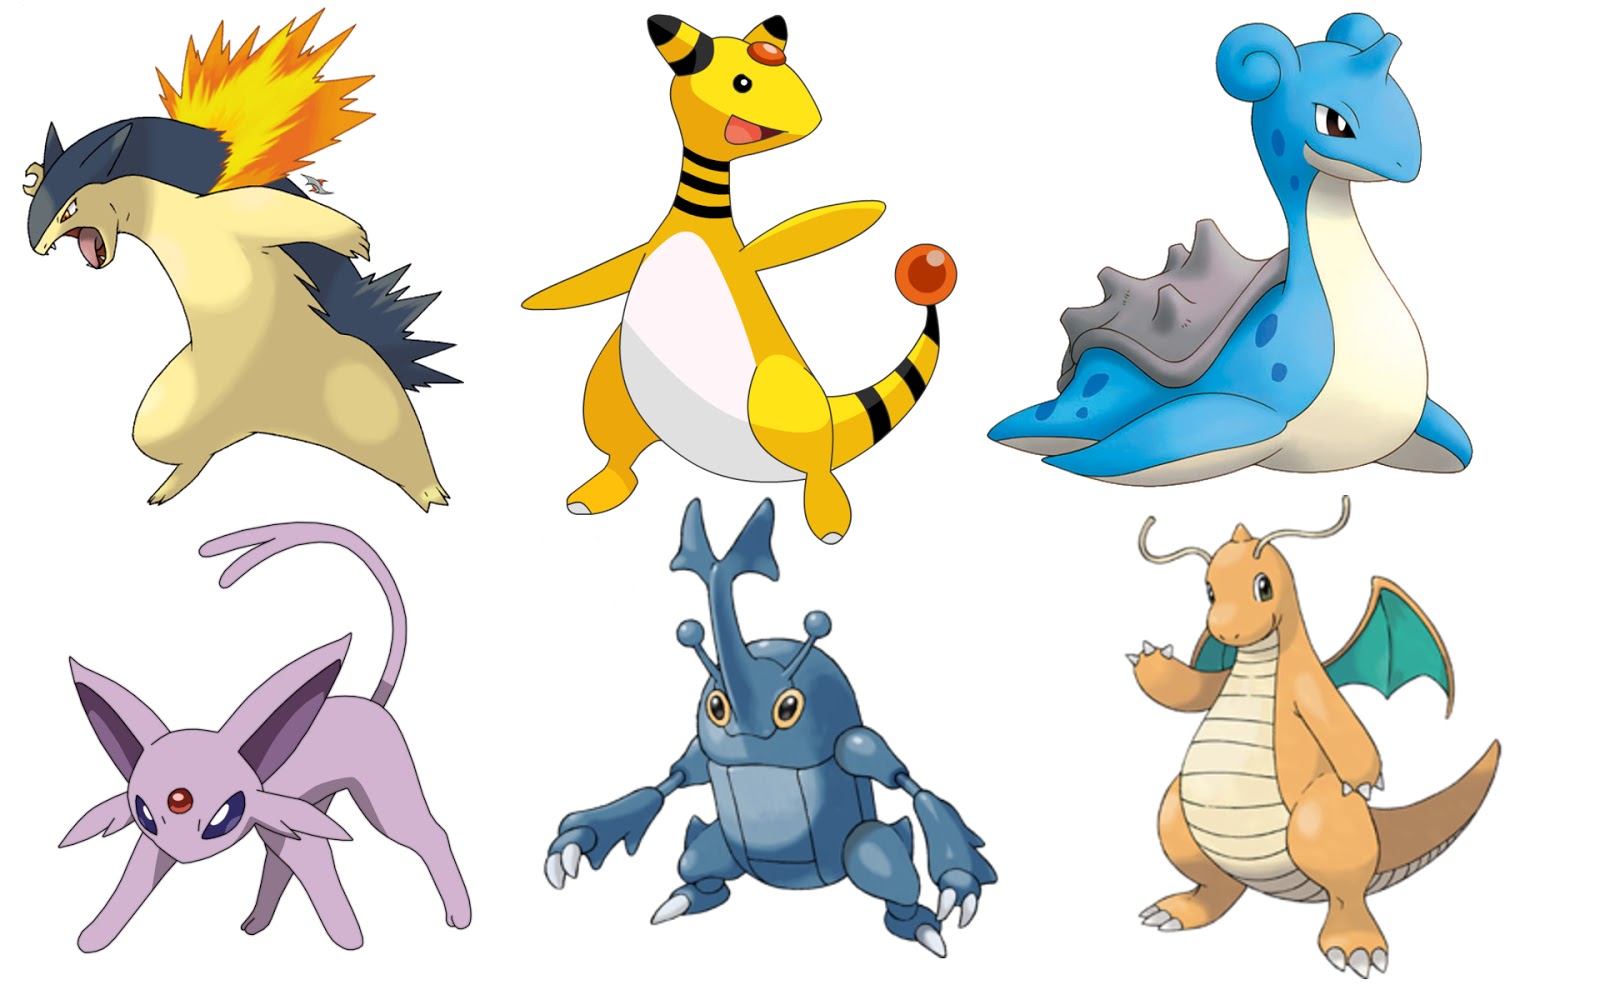 The best team for Pokemon Gold and Silver